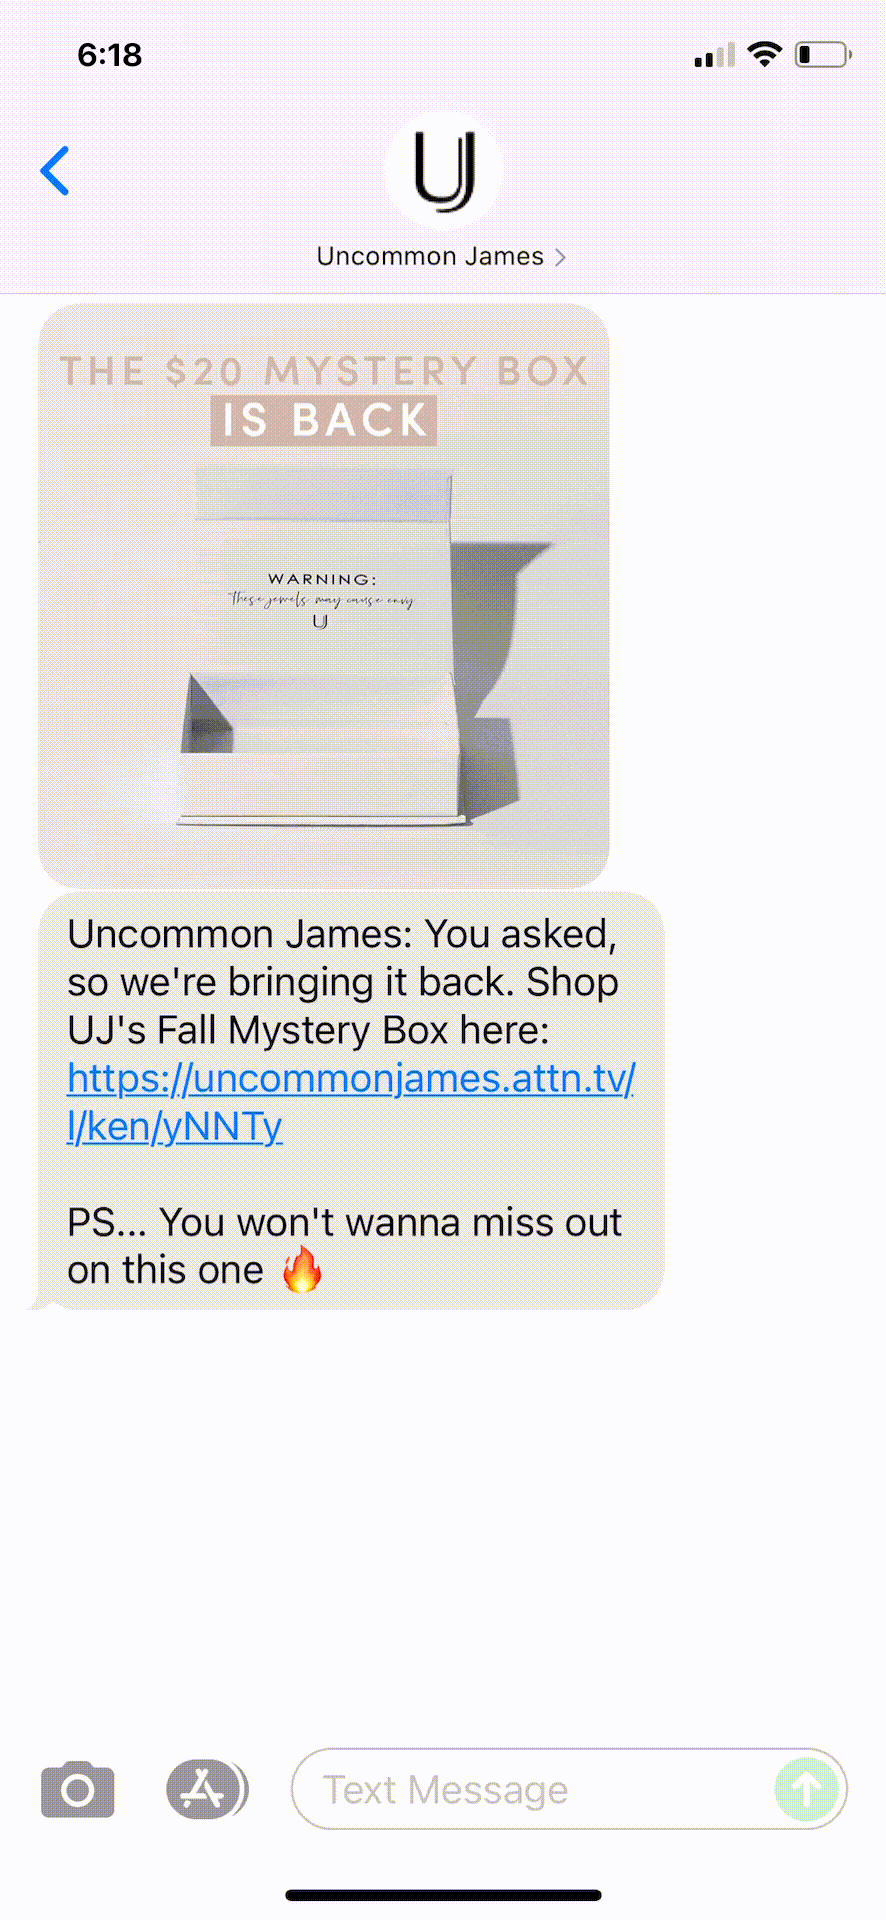 Uncommon-James-Text-Message-Marketing-Example-07.21.2021